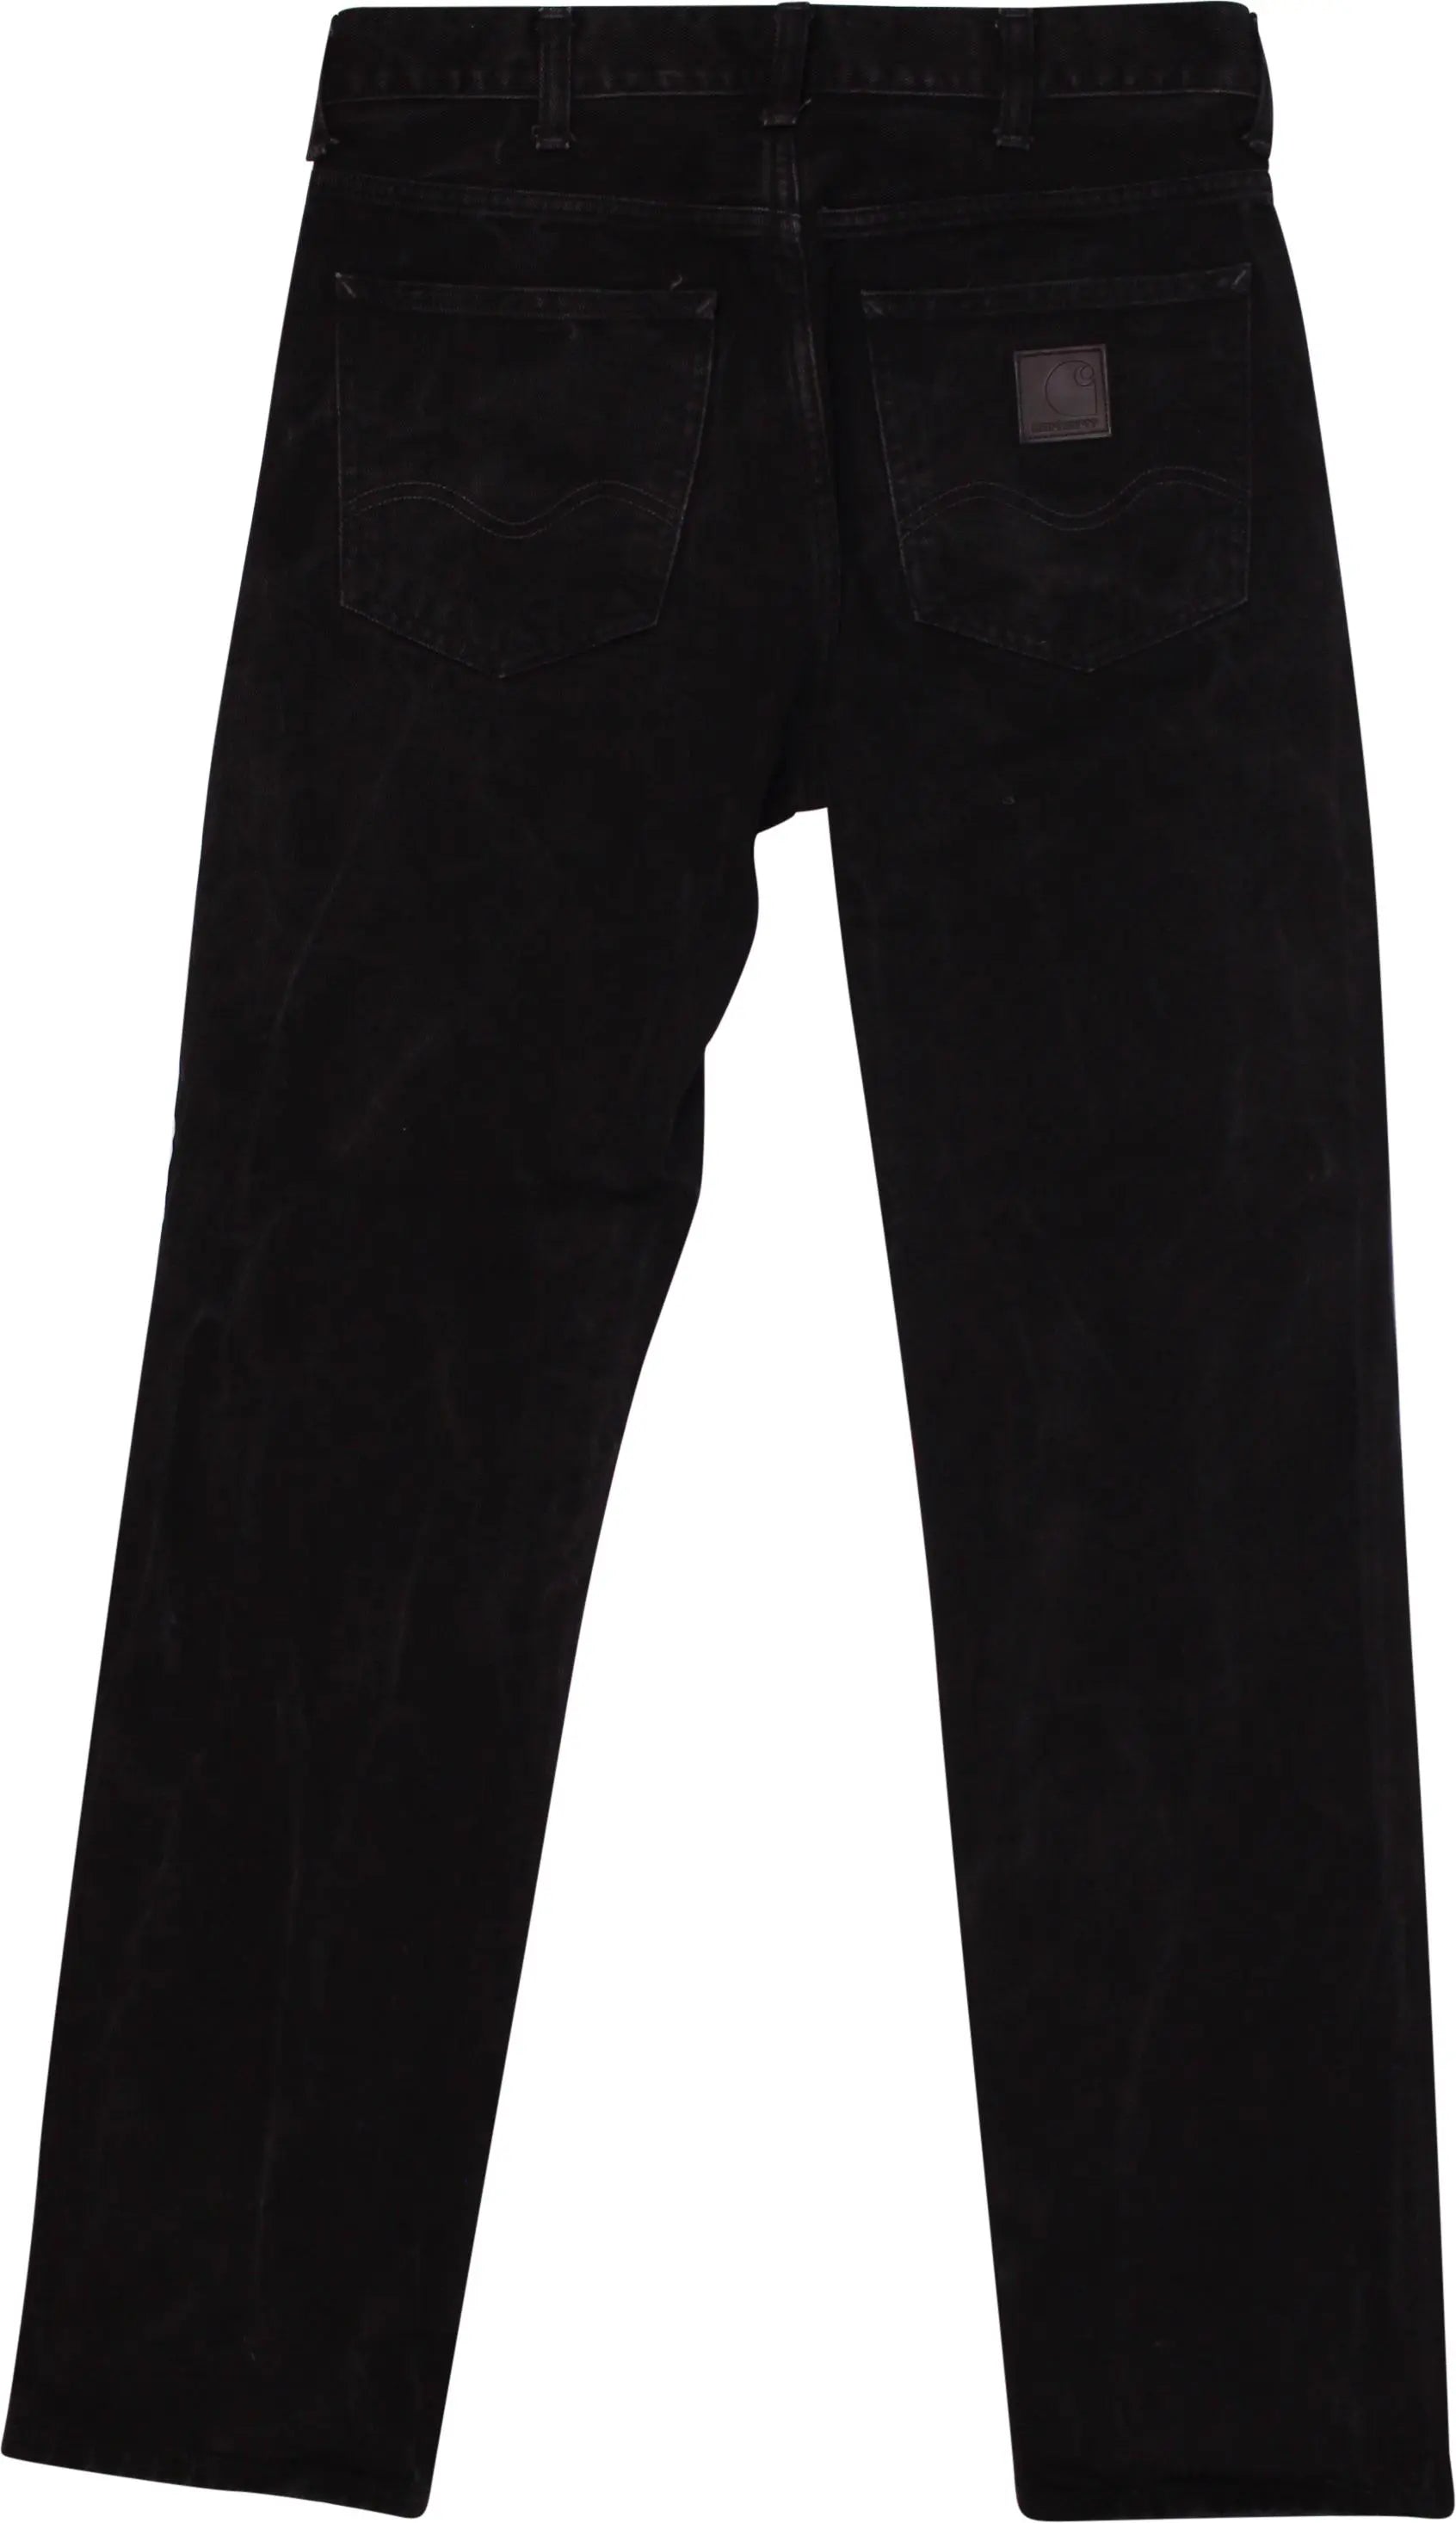 Carhartt - Black Slim Fit Jeans by Carhartt- ThriftTale.com - Vintage and second handclothing